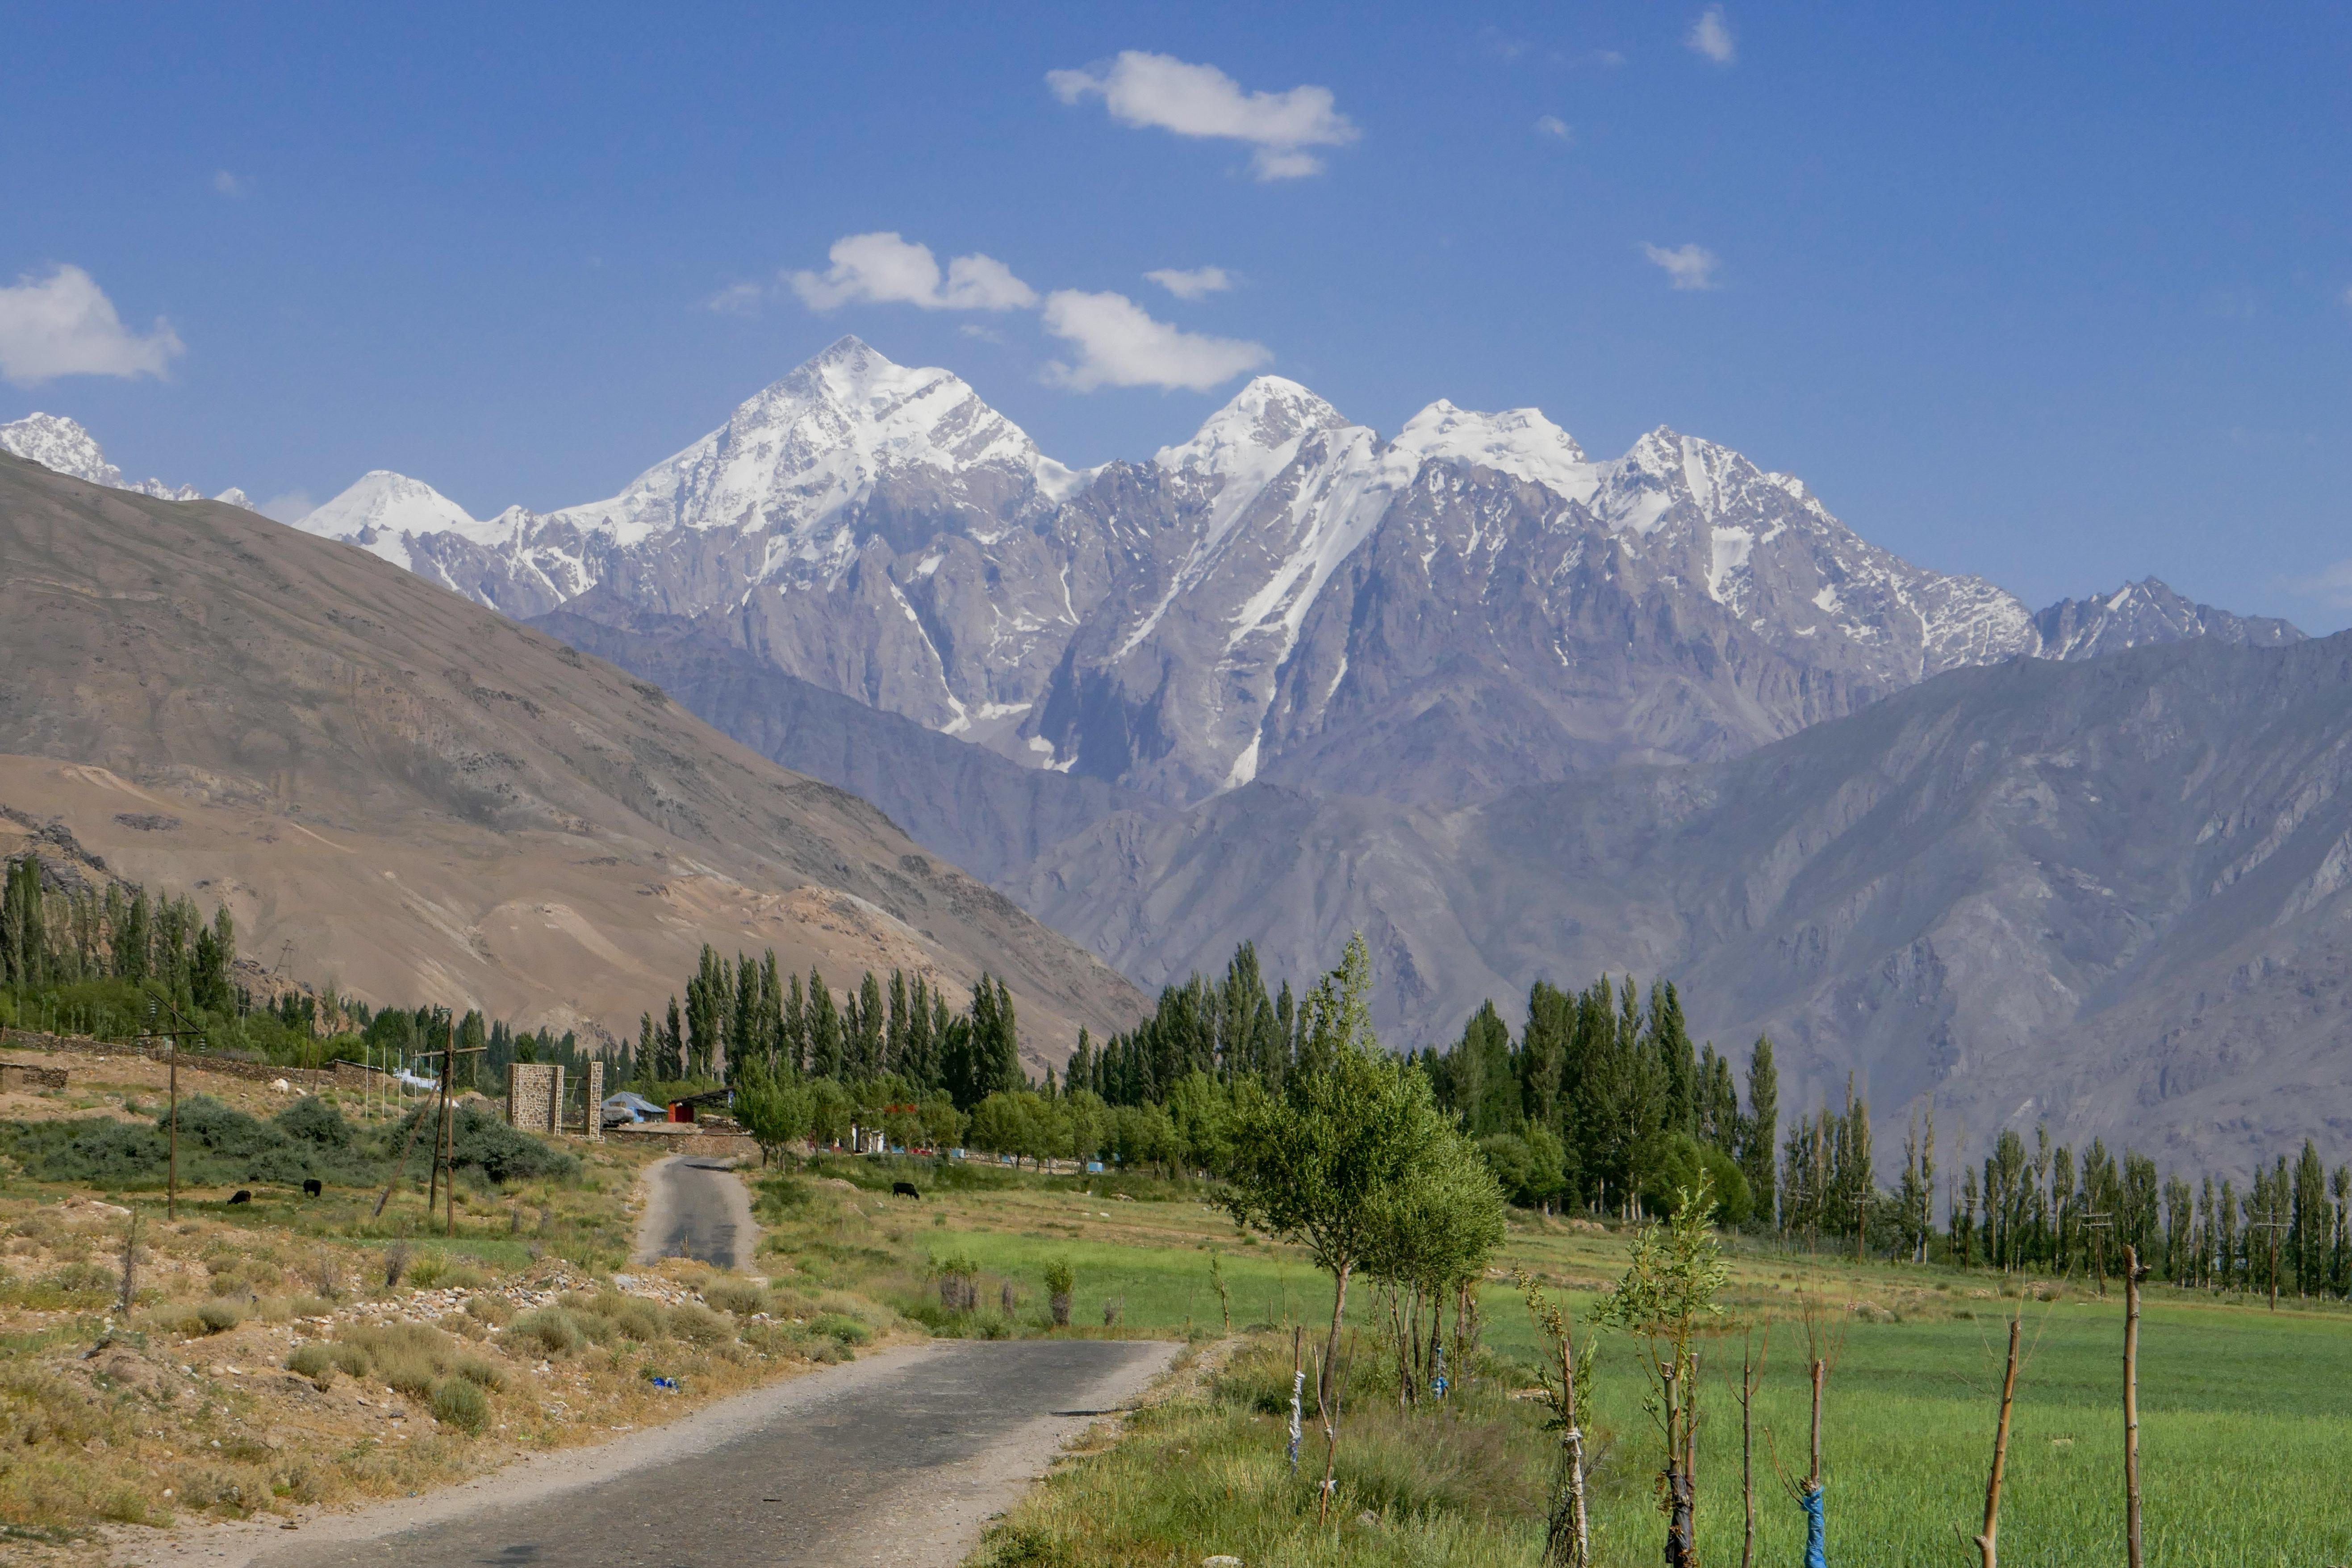 Amazing mountain views in the Wakhan corridor - Photo credits: Cyrille Redor